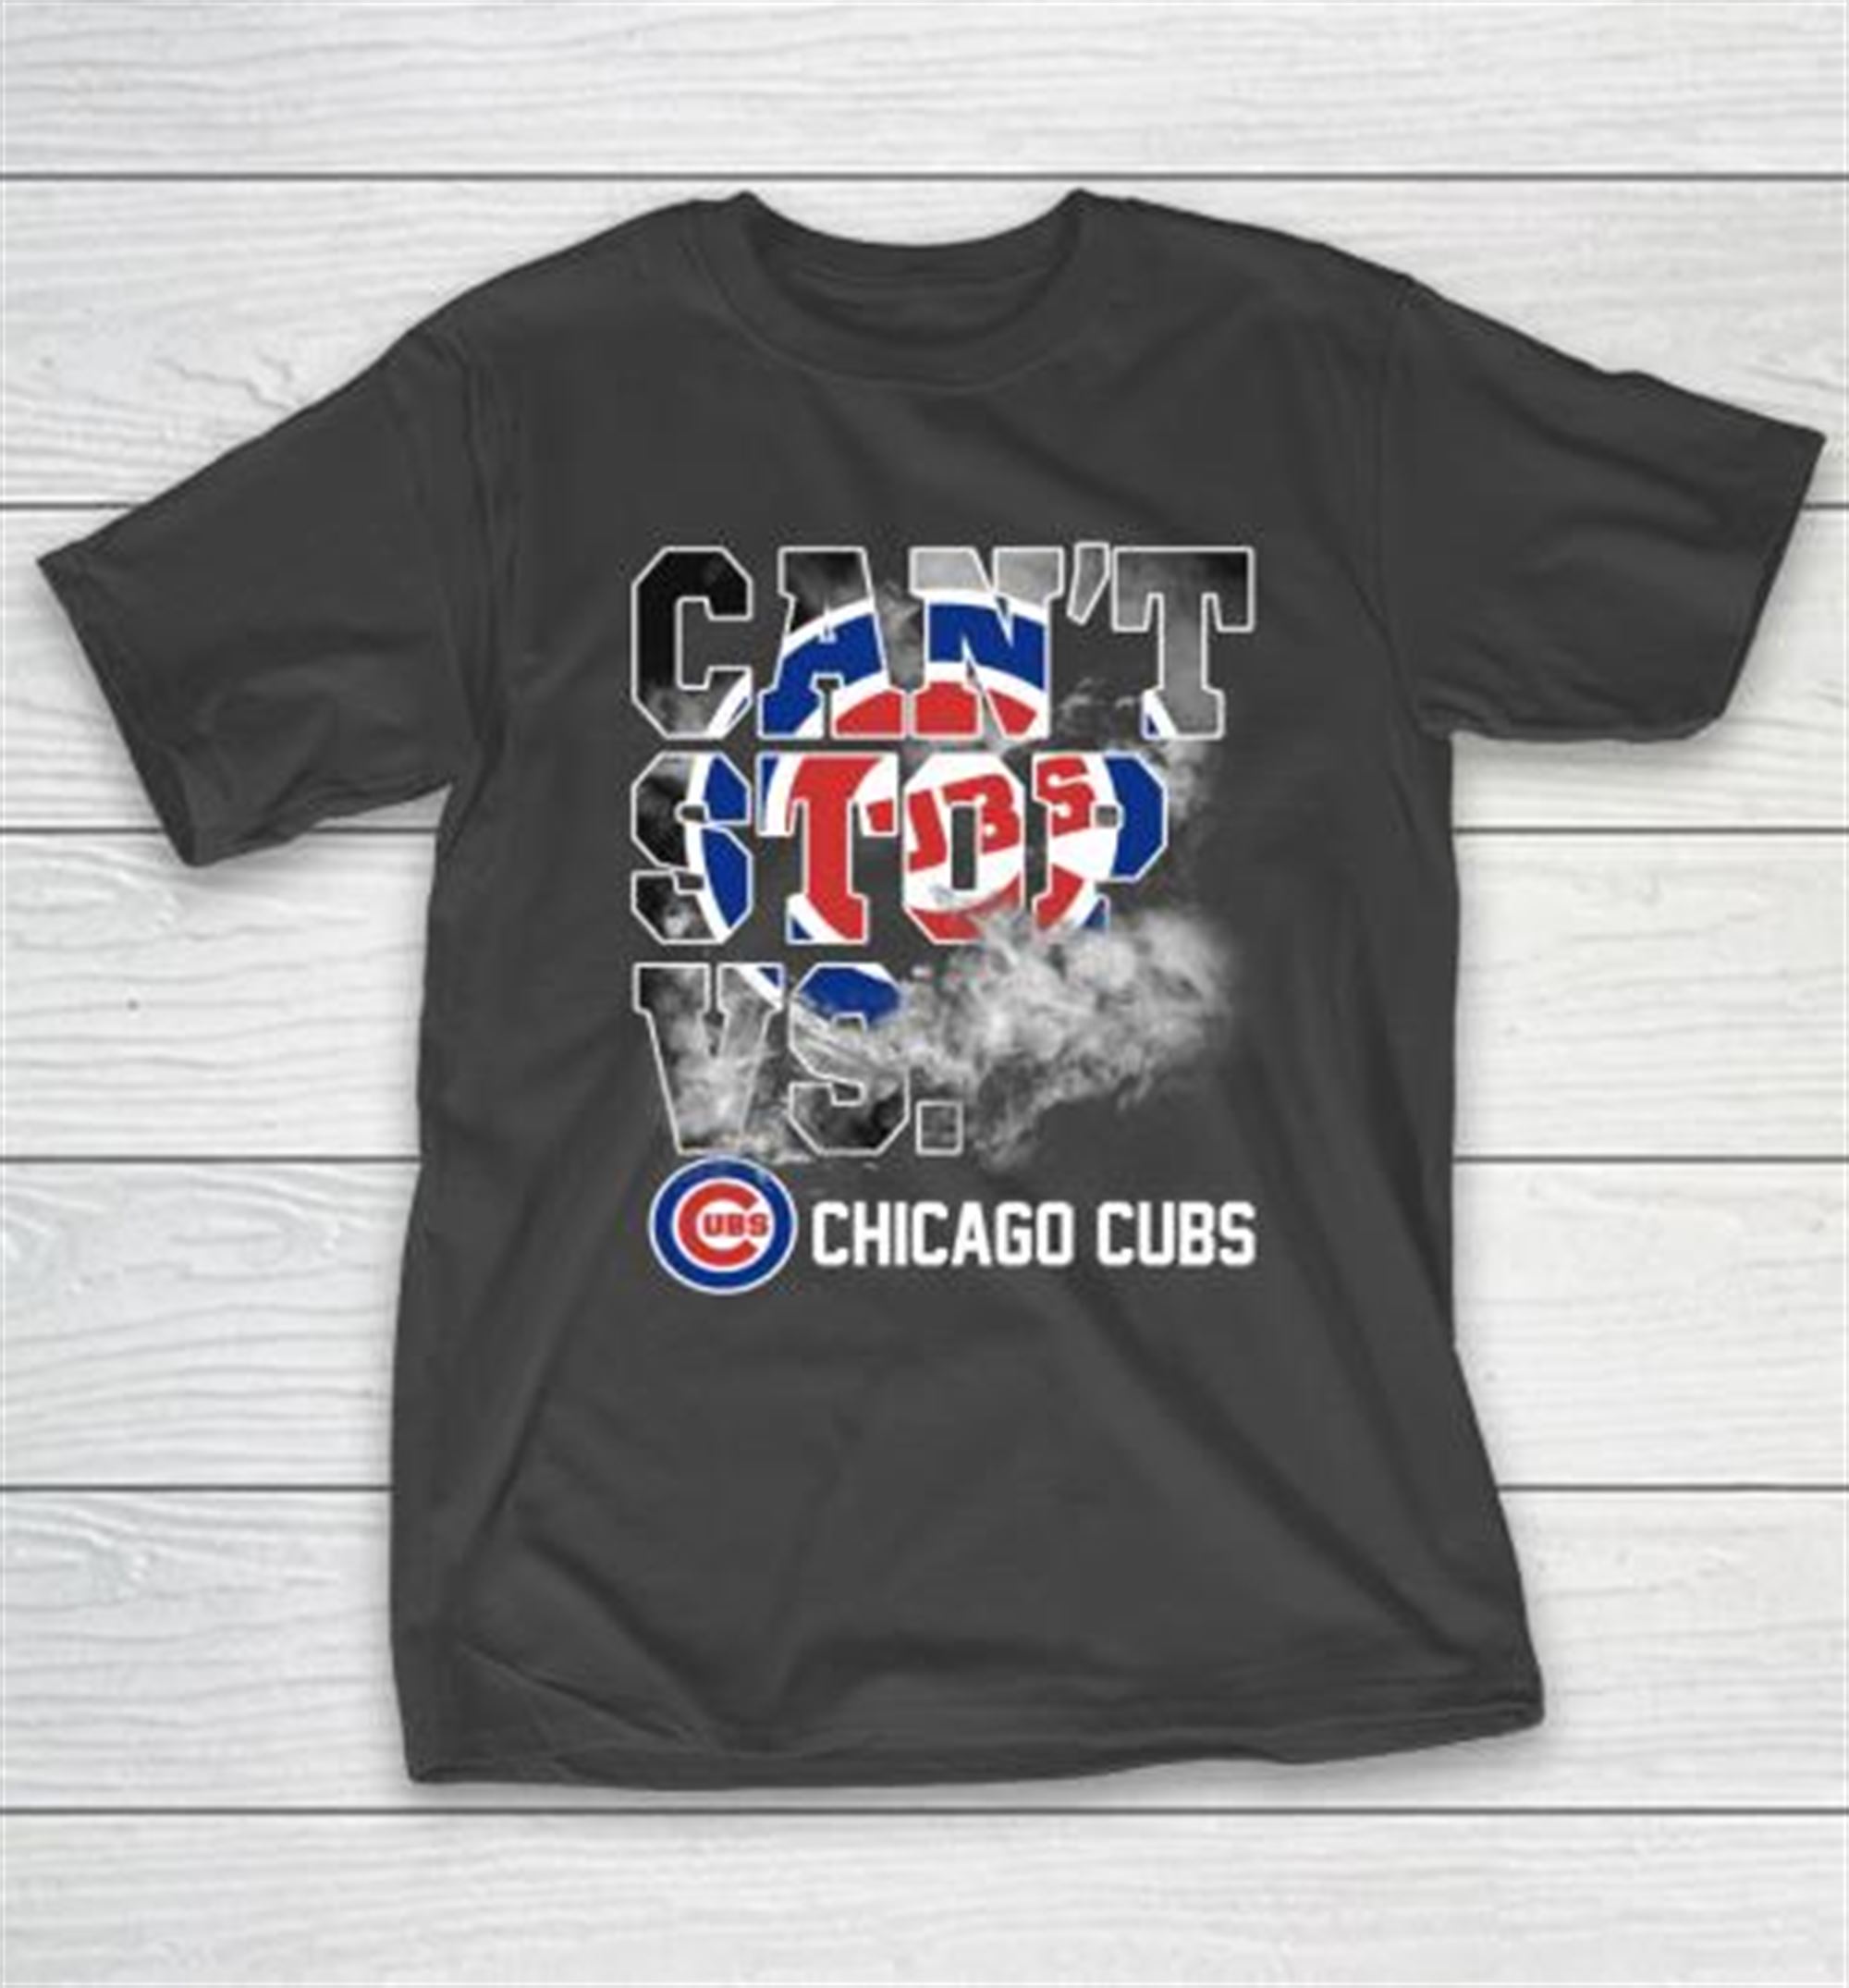 Chicago Cubs Baseball Cant Stop Vs Chicago Cubs T-shirt Size Up To 5xl